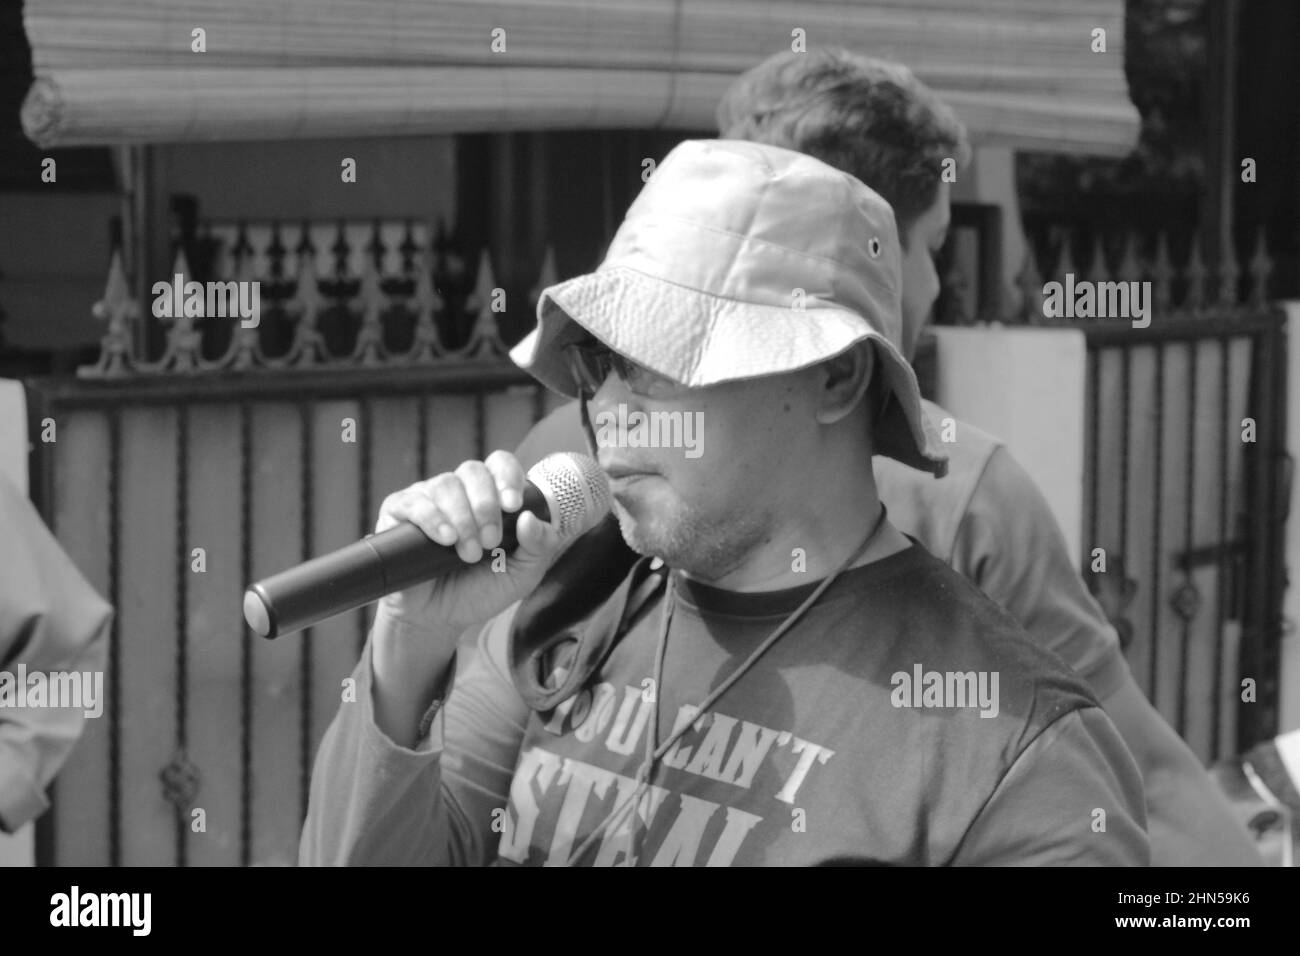 Jakarta, Indonesia - 07 31 2020: man speaking into a microphone to organize the commemoration of Eid al-Adha for Muslims Stock Photo